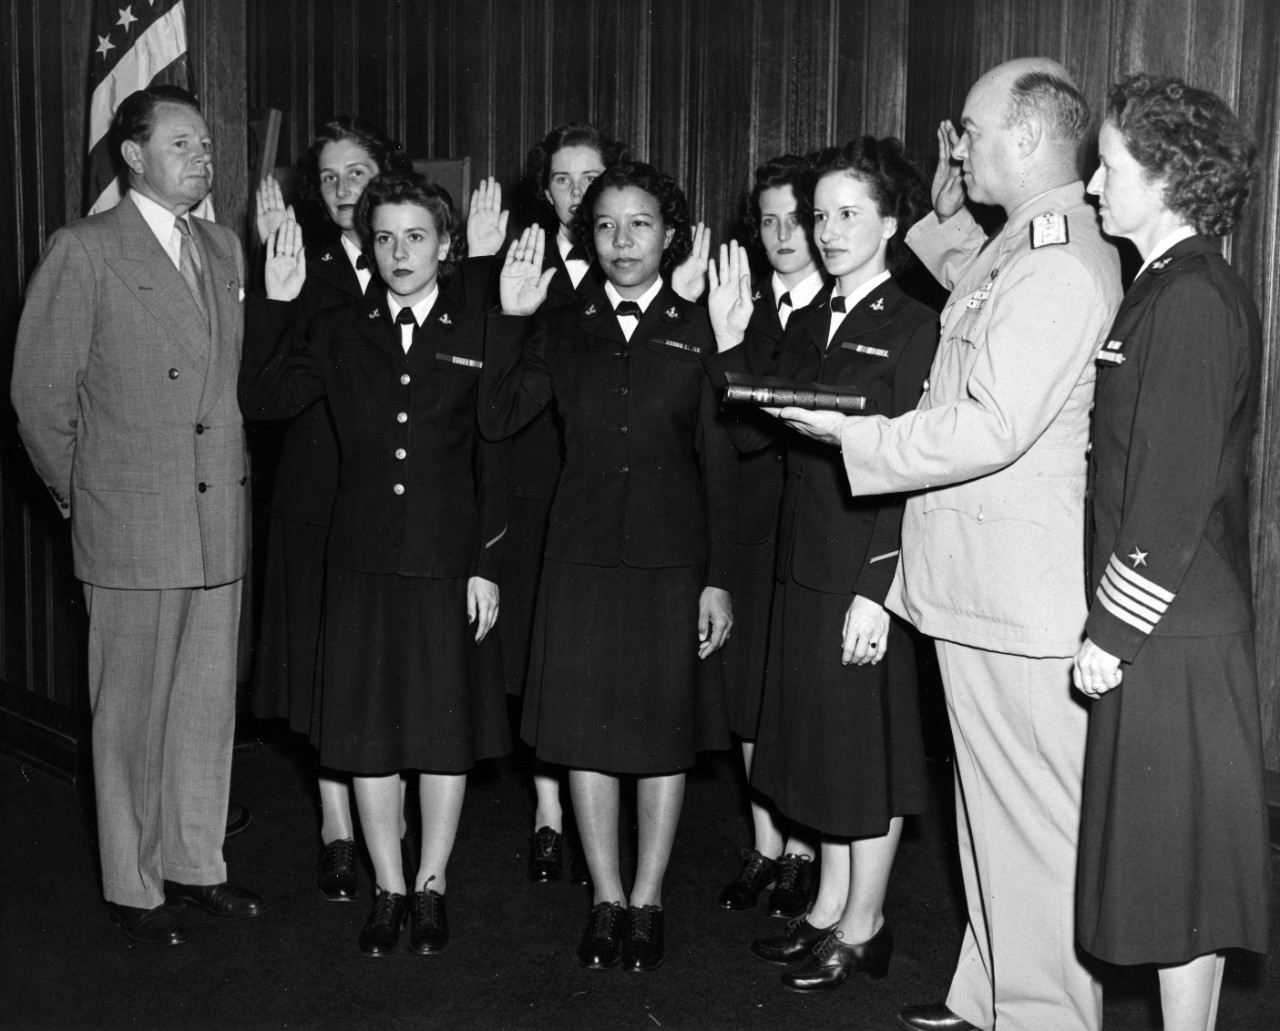 Swearing in of the first six women in the Regular Navy while the Secretary of the Navy John L. Sullivan, far left , looks on. Captain Joy B. Hancock, Director of the Woman's Reserve, is to RADM Russell's left, 7 July, 1948. The first six enlisted women are: (front row, left to right) Chief Yeoman Wilma J. Marchal, USN; Yeoman Second Class Edna E. Young, USN; and Hospital Corpsman First Class Ruth Flora, USN. Second Row (left to right): Aviation Storekeeper First Class Kay L. Langen, USN; Storekeeper Second Class Frances T. Devaney, USN; and Teleman Doris R. Robertson, USN. 